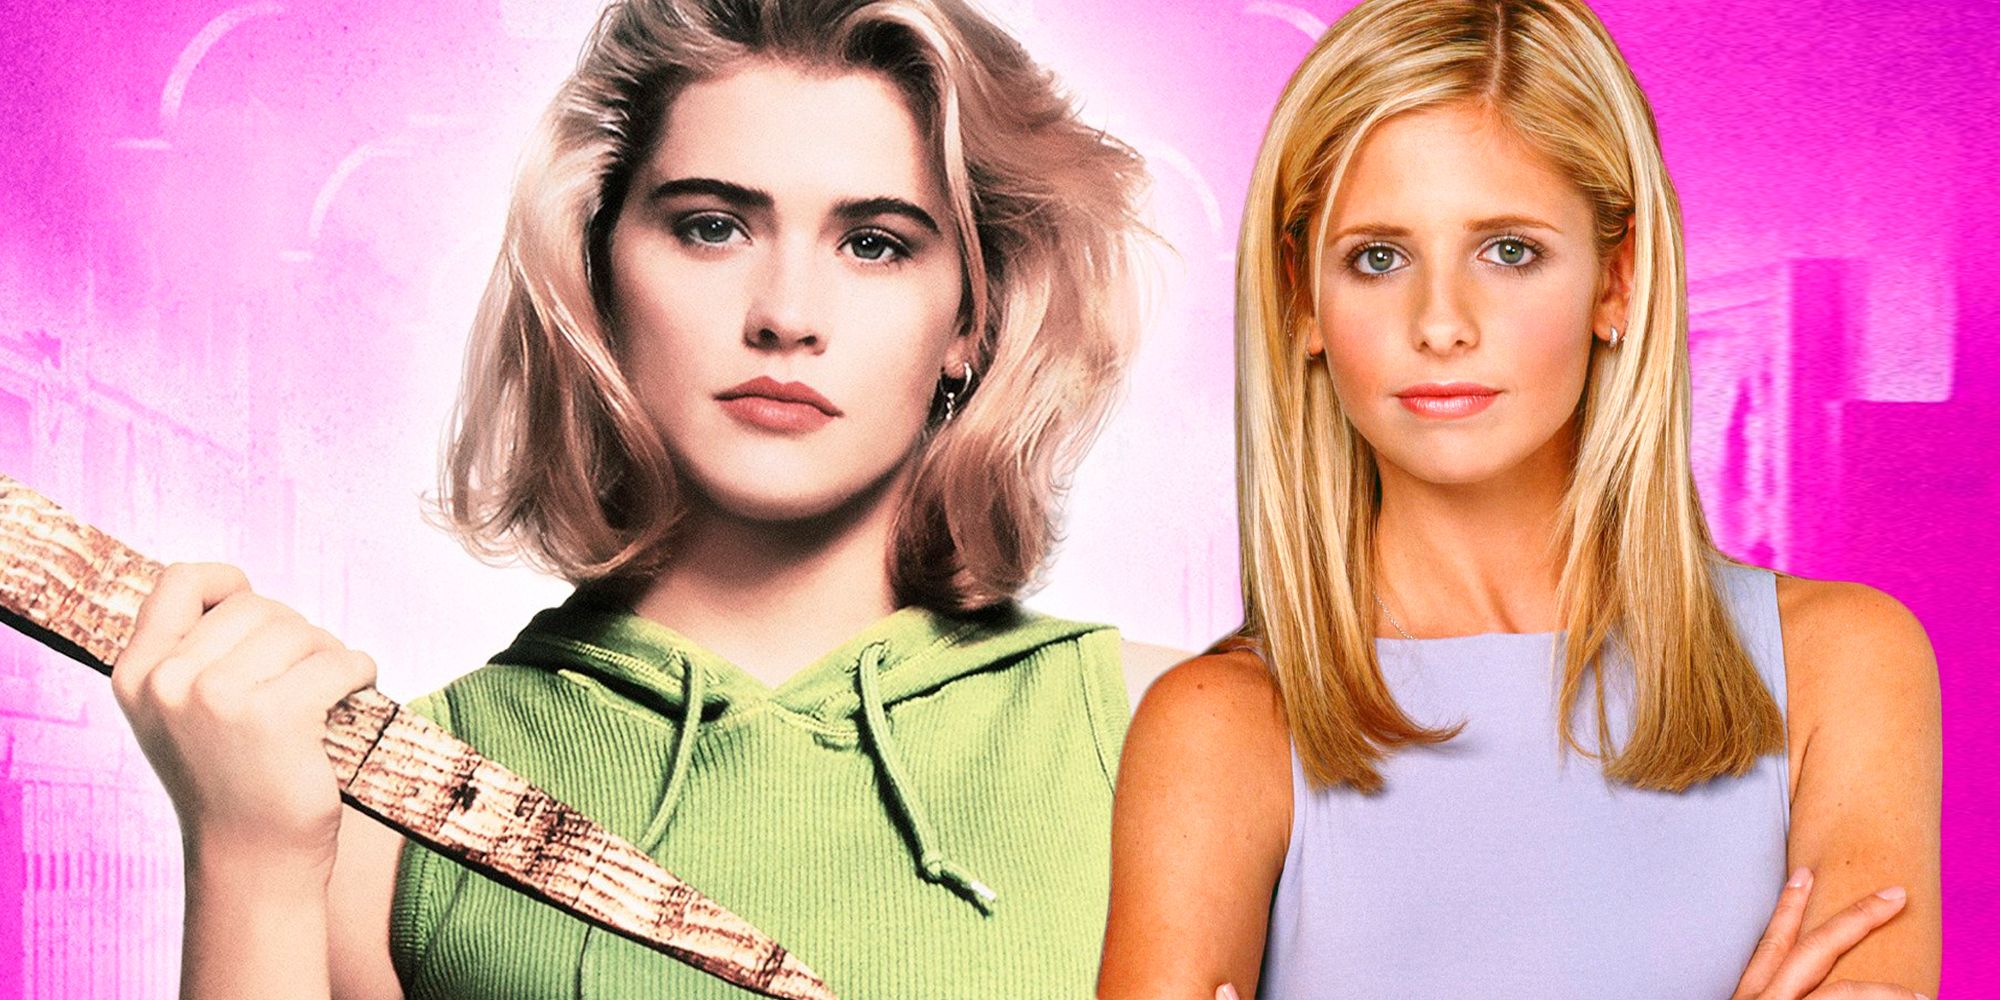 Sarah Michelle Gellar and Kristy Swanson as Buffy in Buffy the Vampire Slayer Tv Show and 1992 Movie